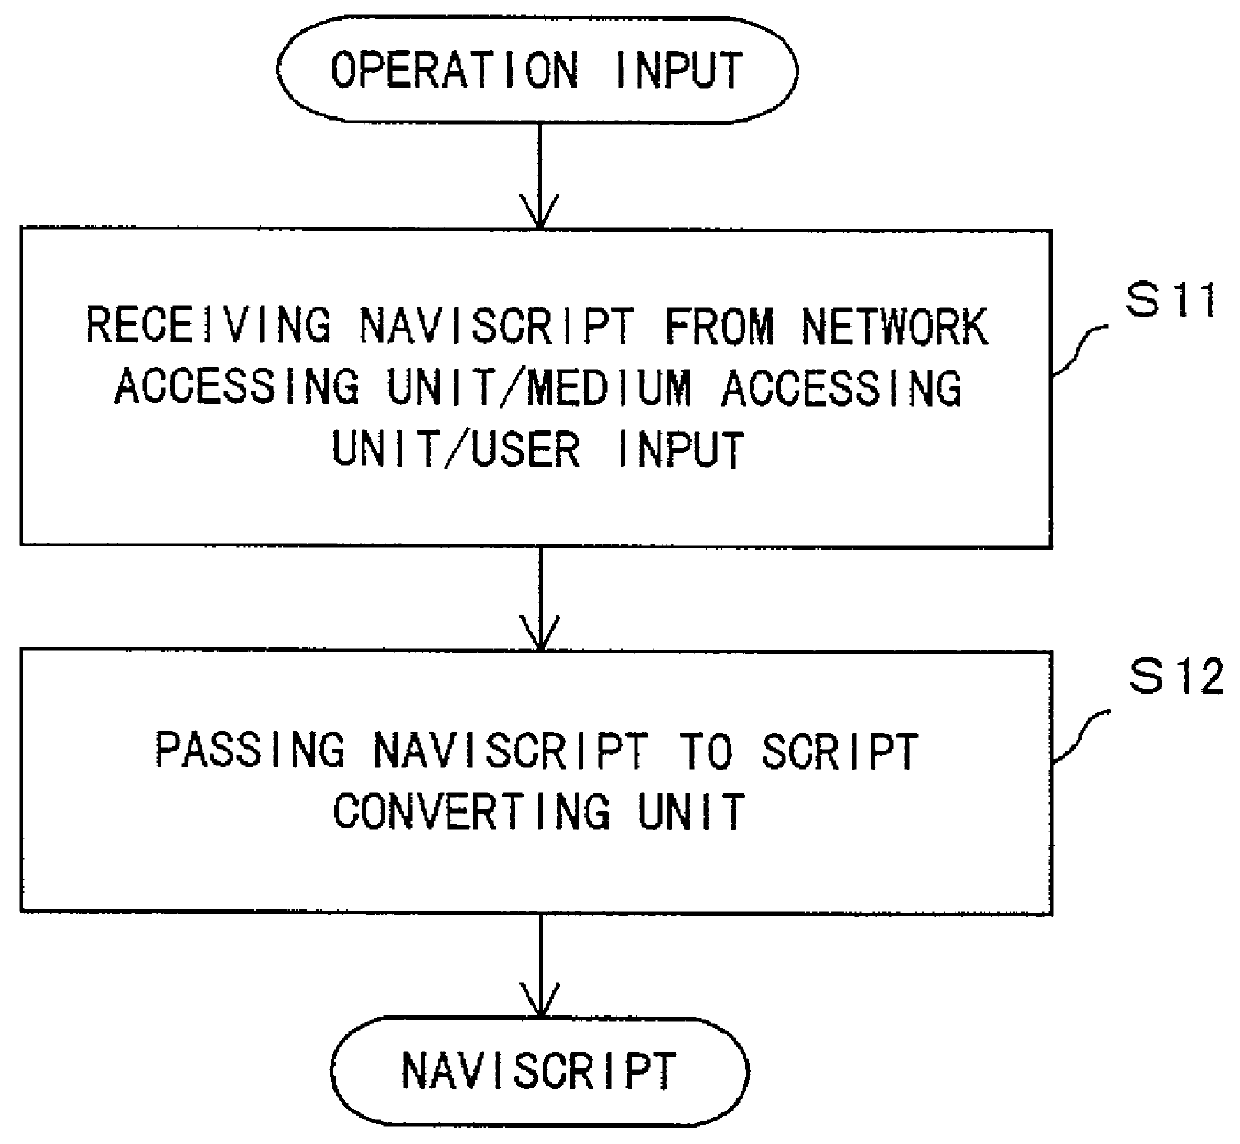 Apparatus and method for presenting navigation information based on instructions described in a script